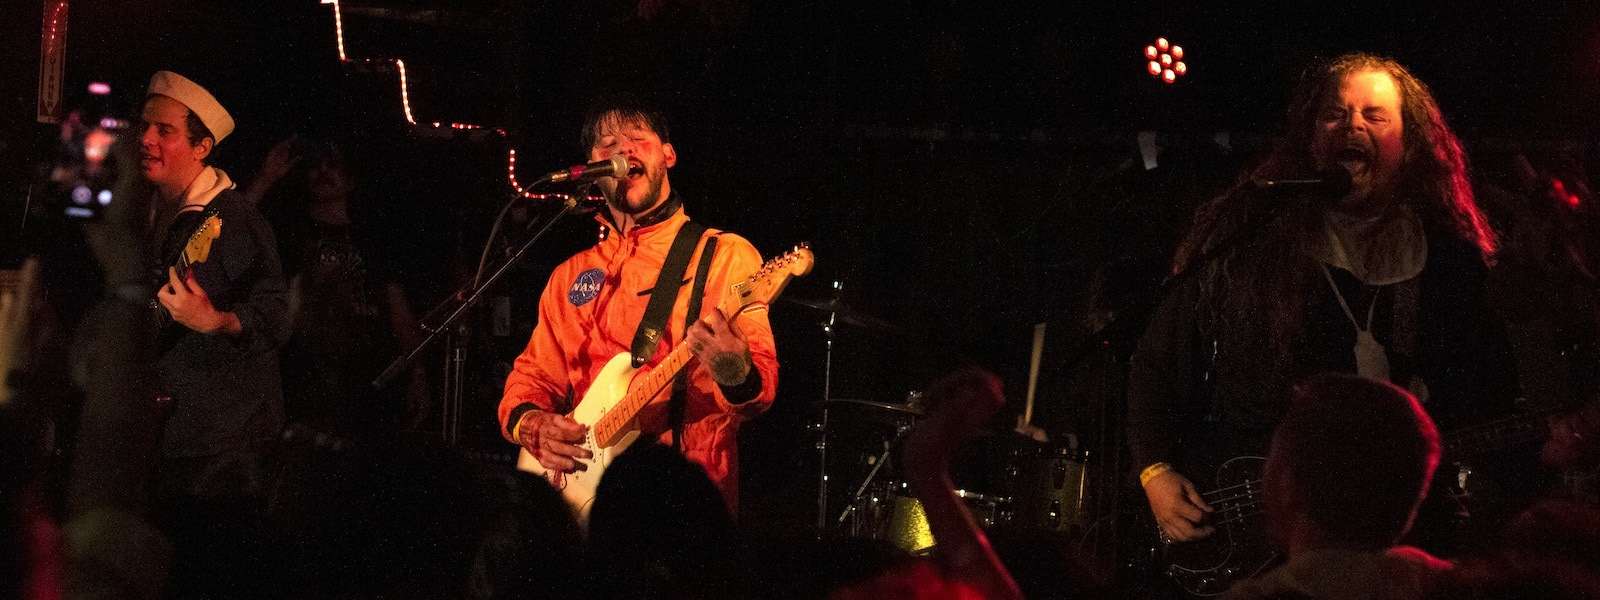 Wavves Live at Subterranean [GALLERY] - Chicago Music Guide